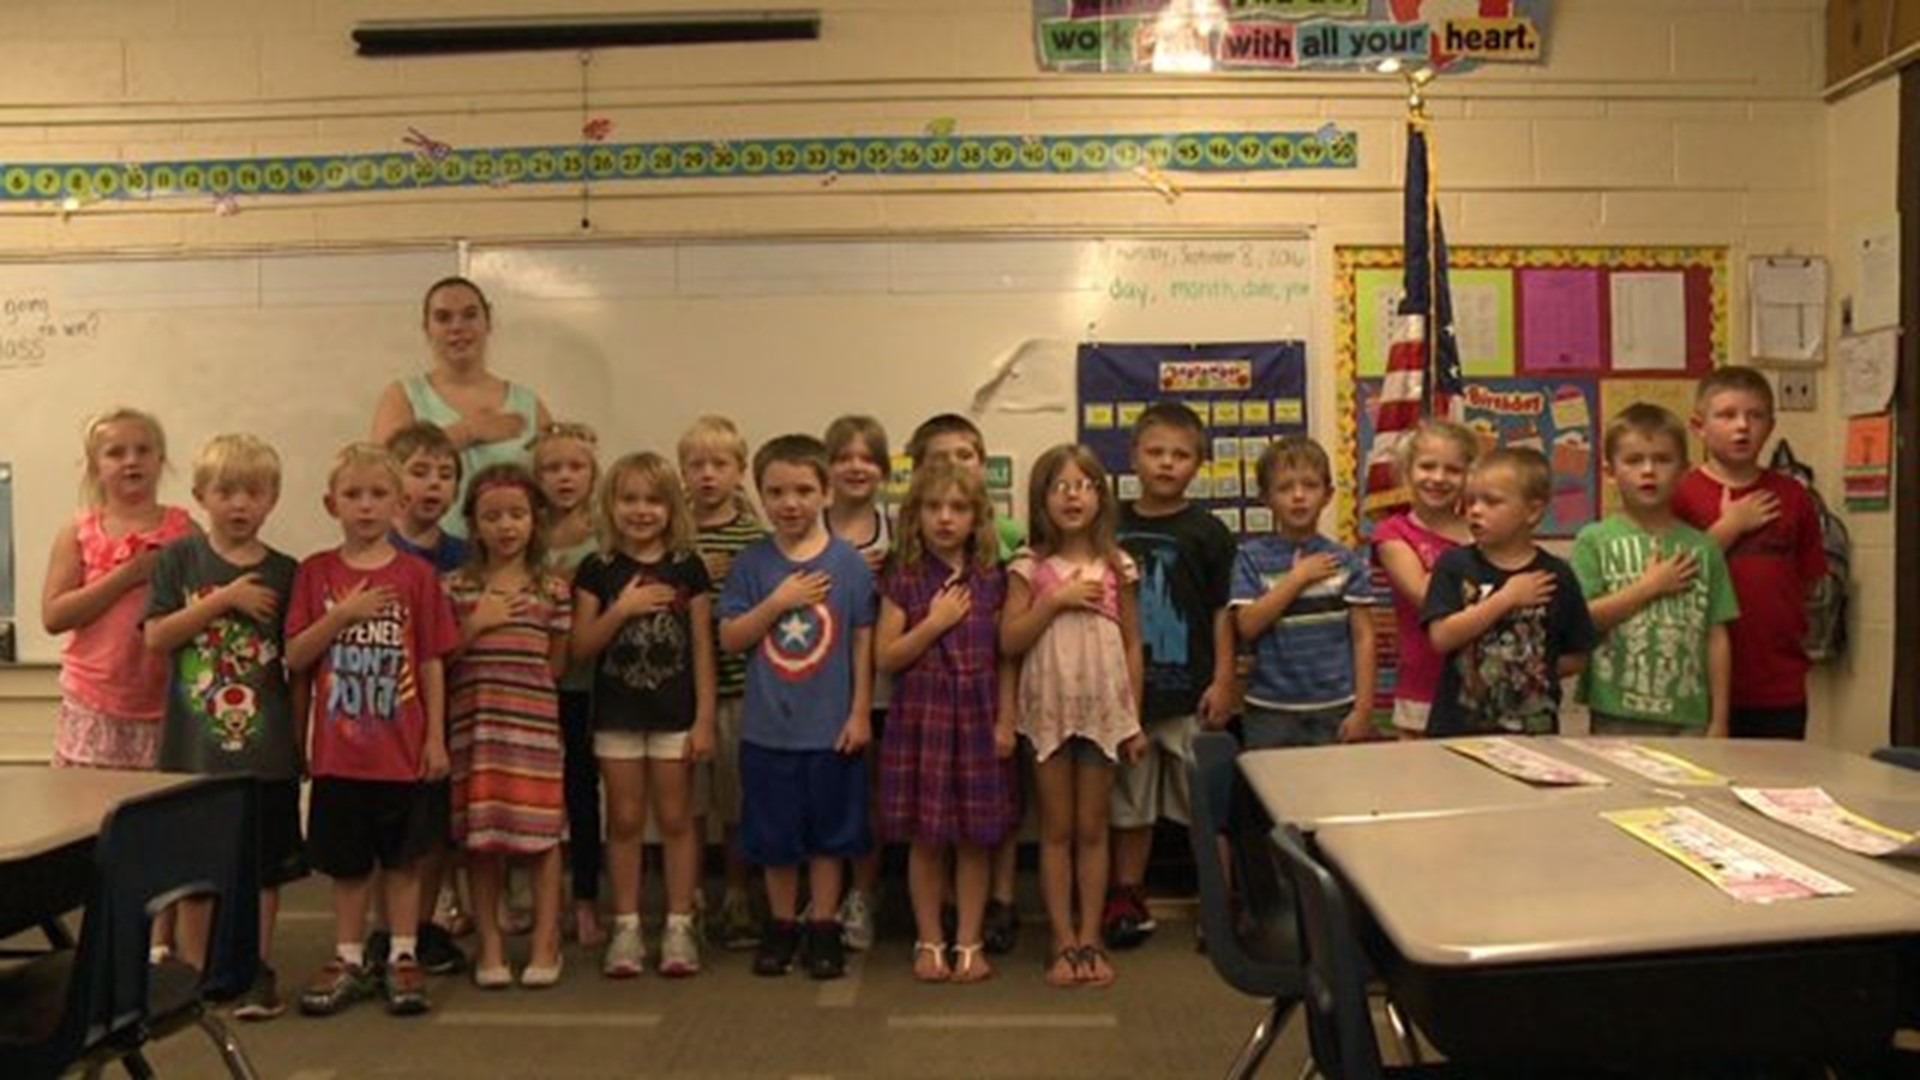 The Pledge from Ms. Gorsegner`s class